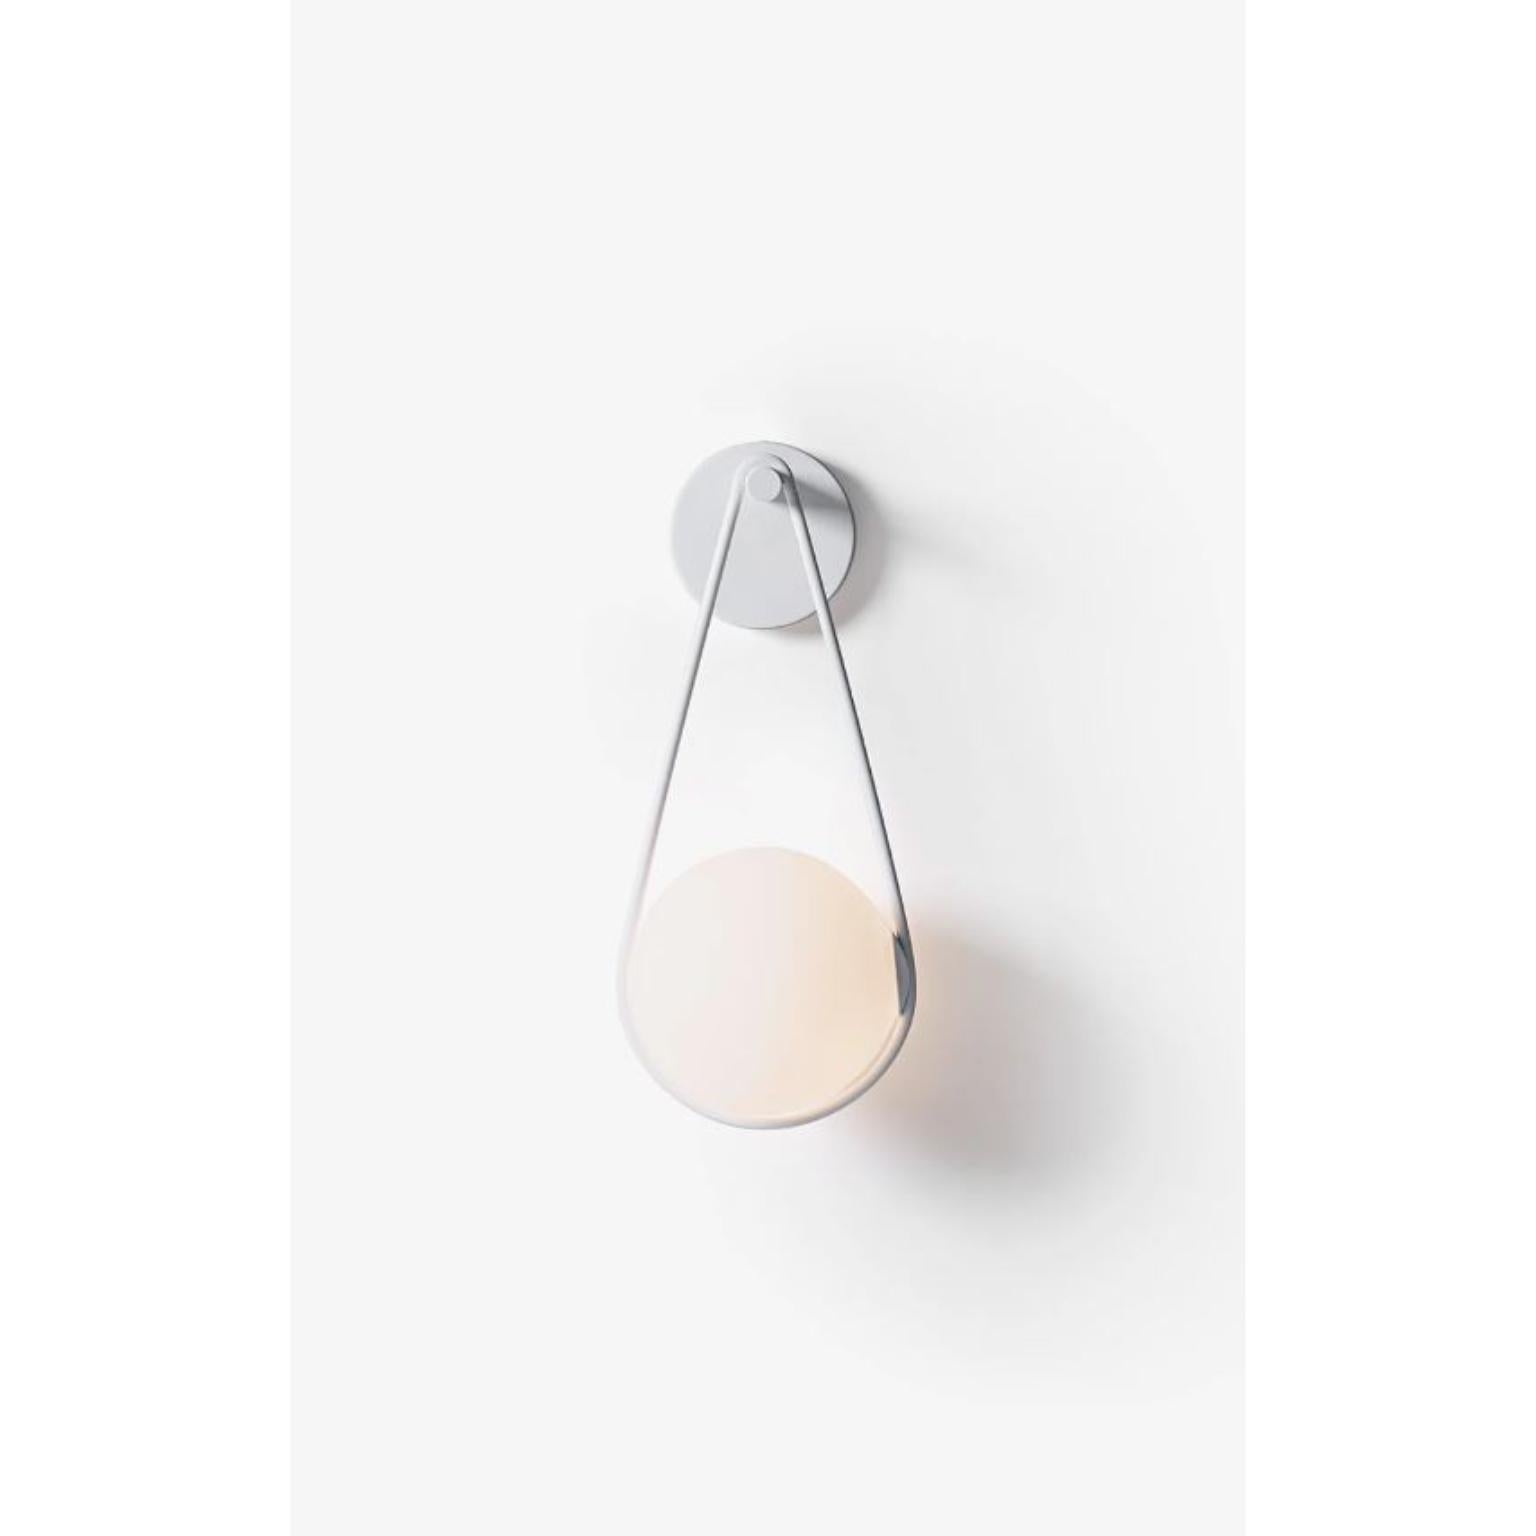 White Corda Wall Lamp by Wentz
Dimensions: D 22 x W 22 x H 55 cm
Materials: Aluminum, Blown Glass.


WEIGHT: 1,2kg / 2,6 lbs
Colors: Black, White
LIGHT SOURCE: Built-in LED. 150lm. 2700K. 80 CRI.
DIMMING ELV @ 120VAC.
VOLTAGE: 120-277V -